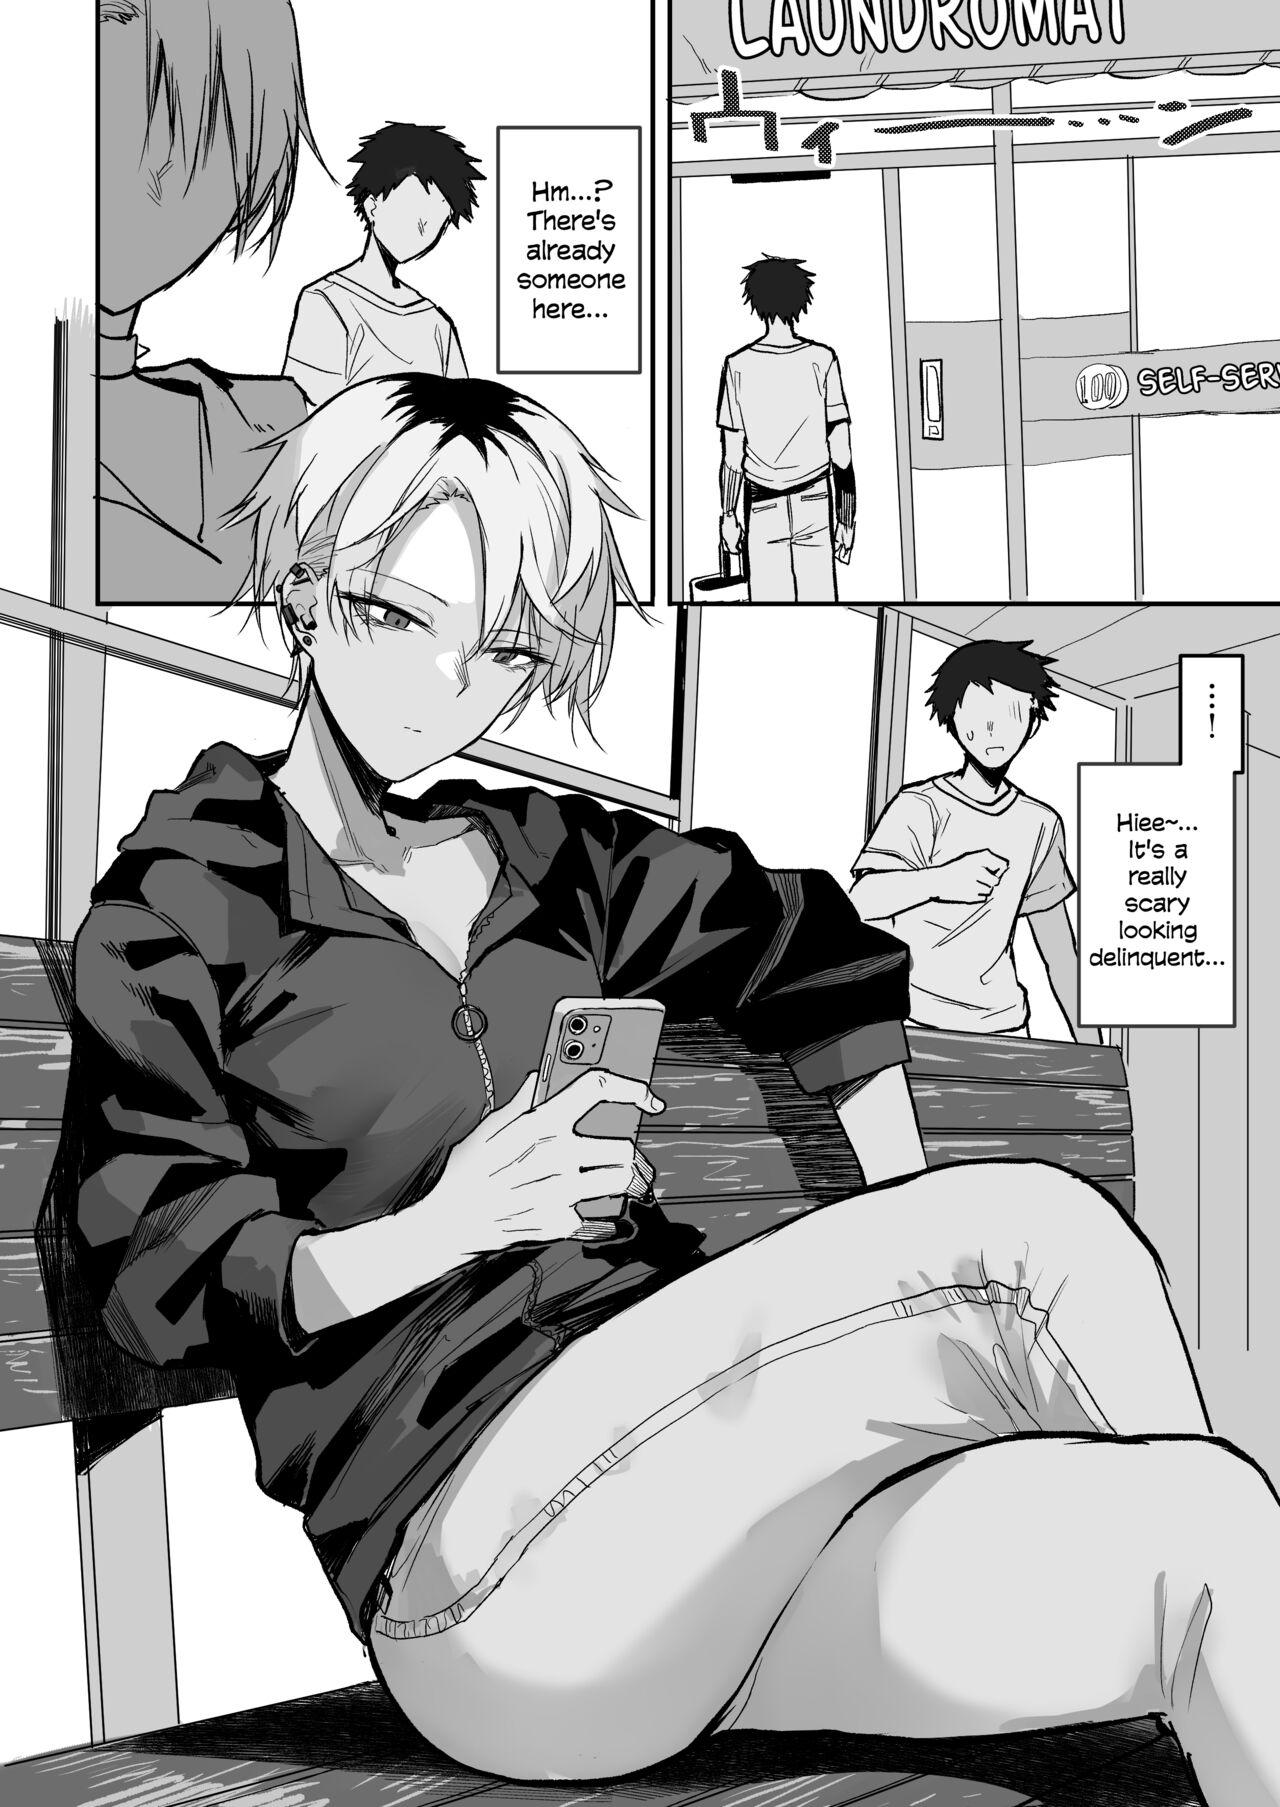 Porno Amateur Coin Laundry de Kowai Yankee ni Karamareru Manga | A Manga About Getting Mixed Up With A Scary Delinquent At The Laundromat - Original Juggs - Page 1